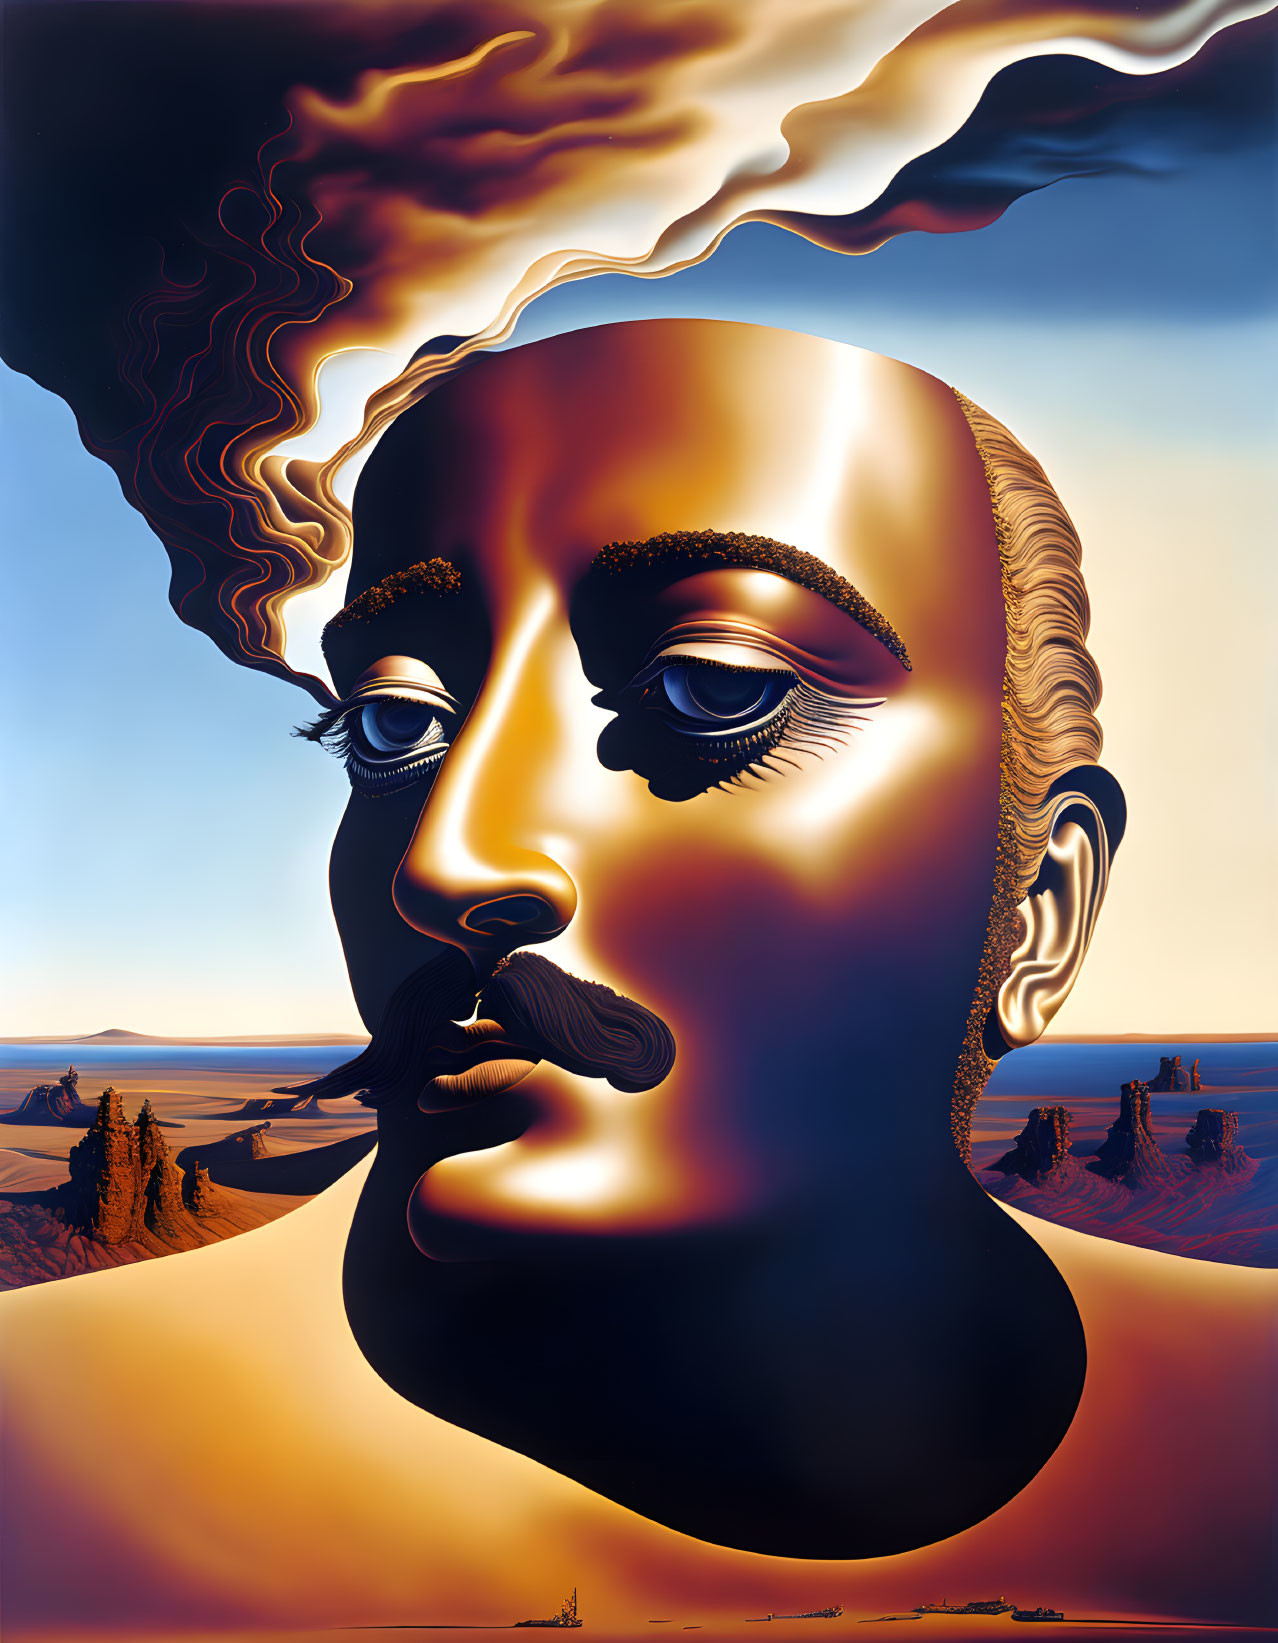 Surrealist painting: face with landscape features, cloud hair, fiery sky